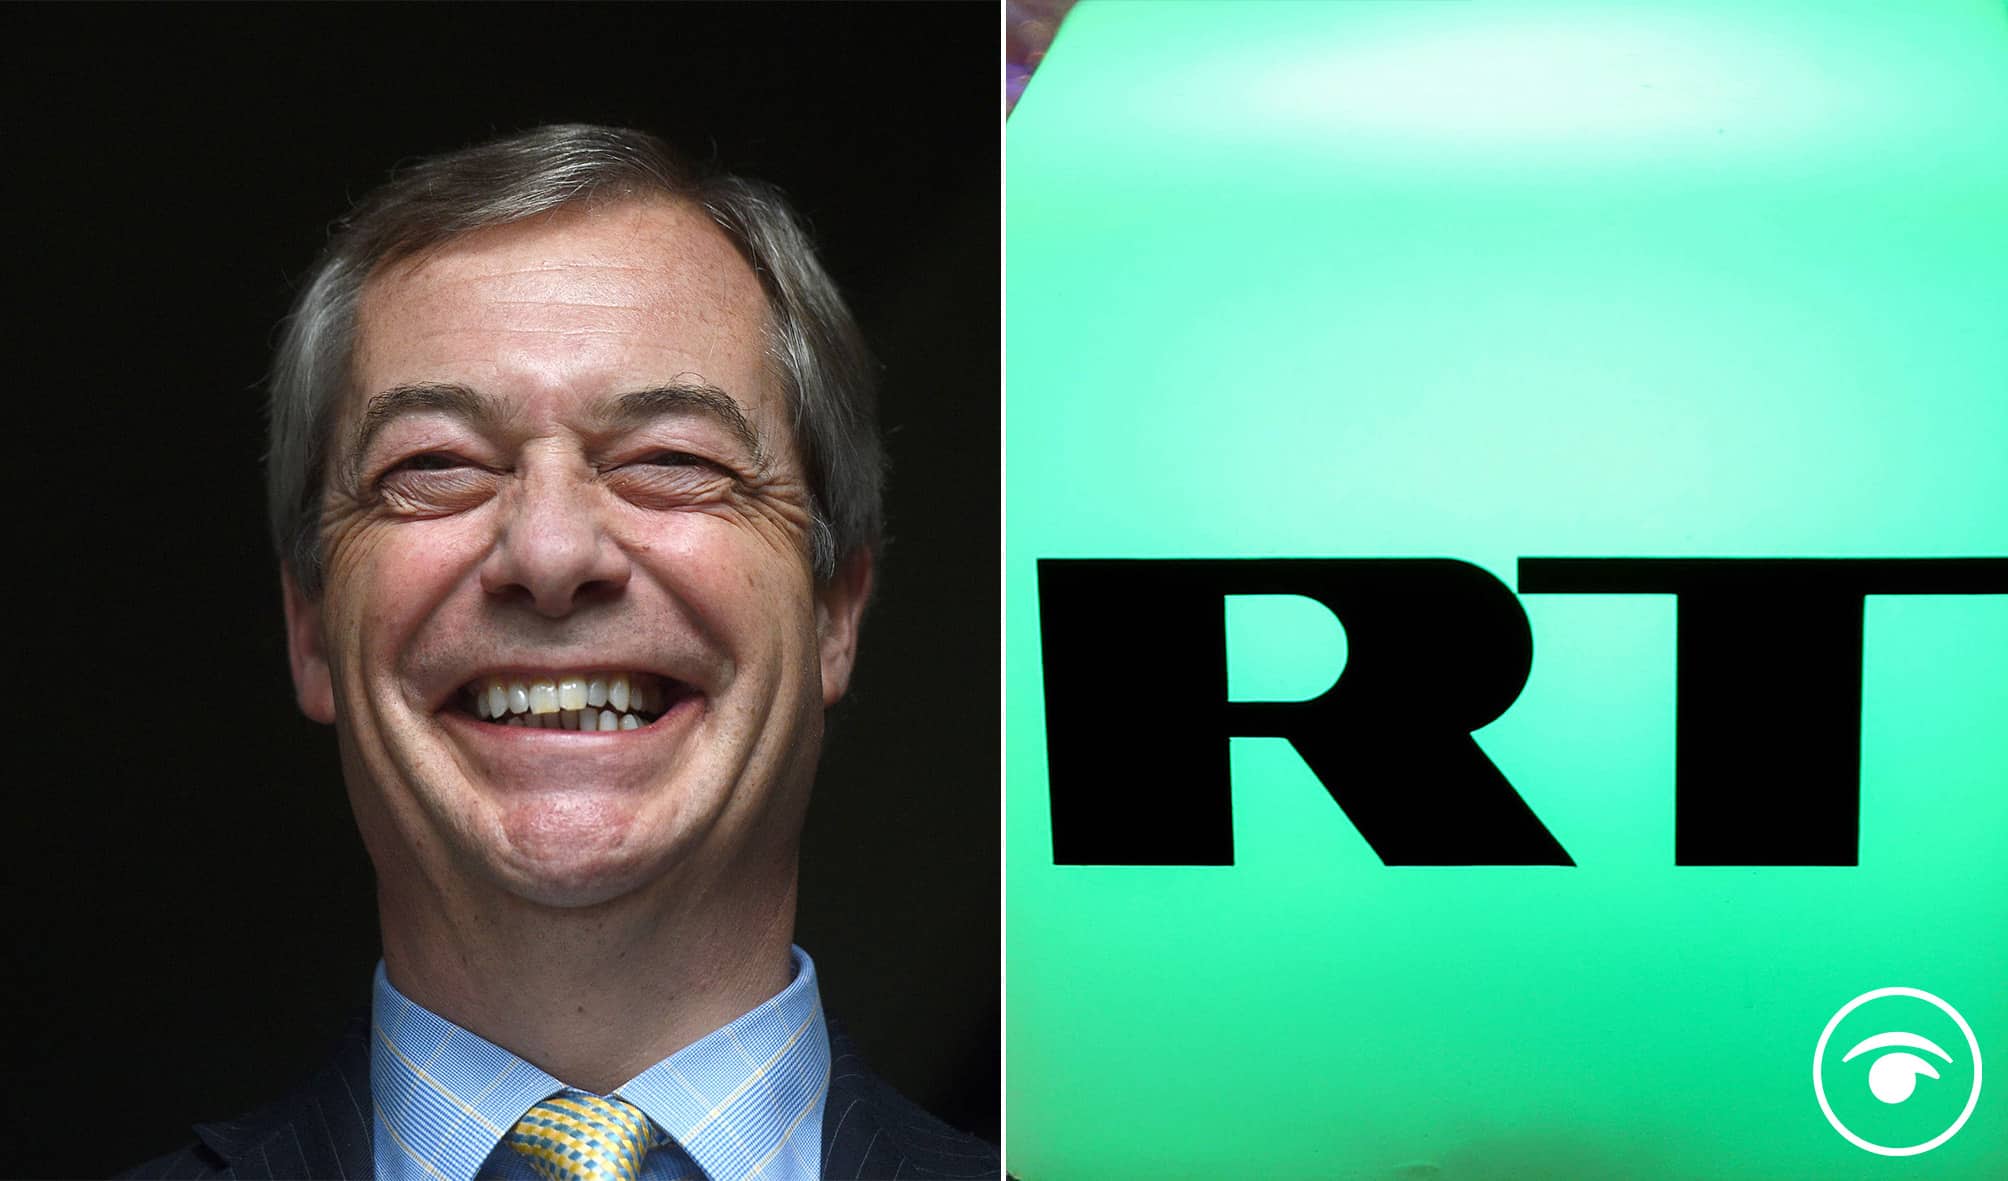 Watch: Russia Today cites Farage as example of not everyone piling blame on Russia